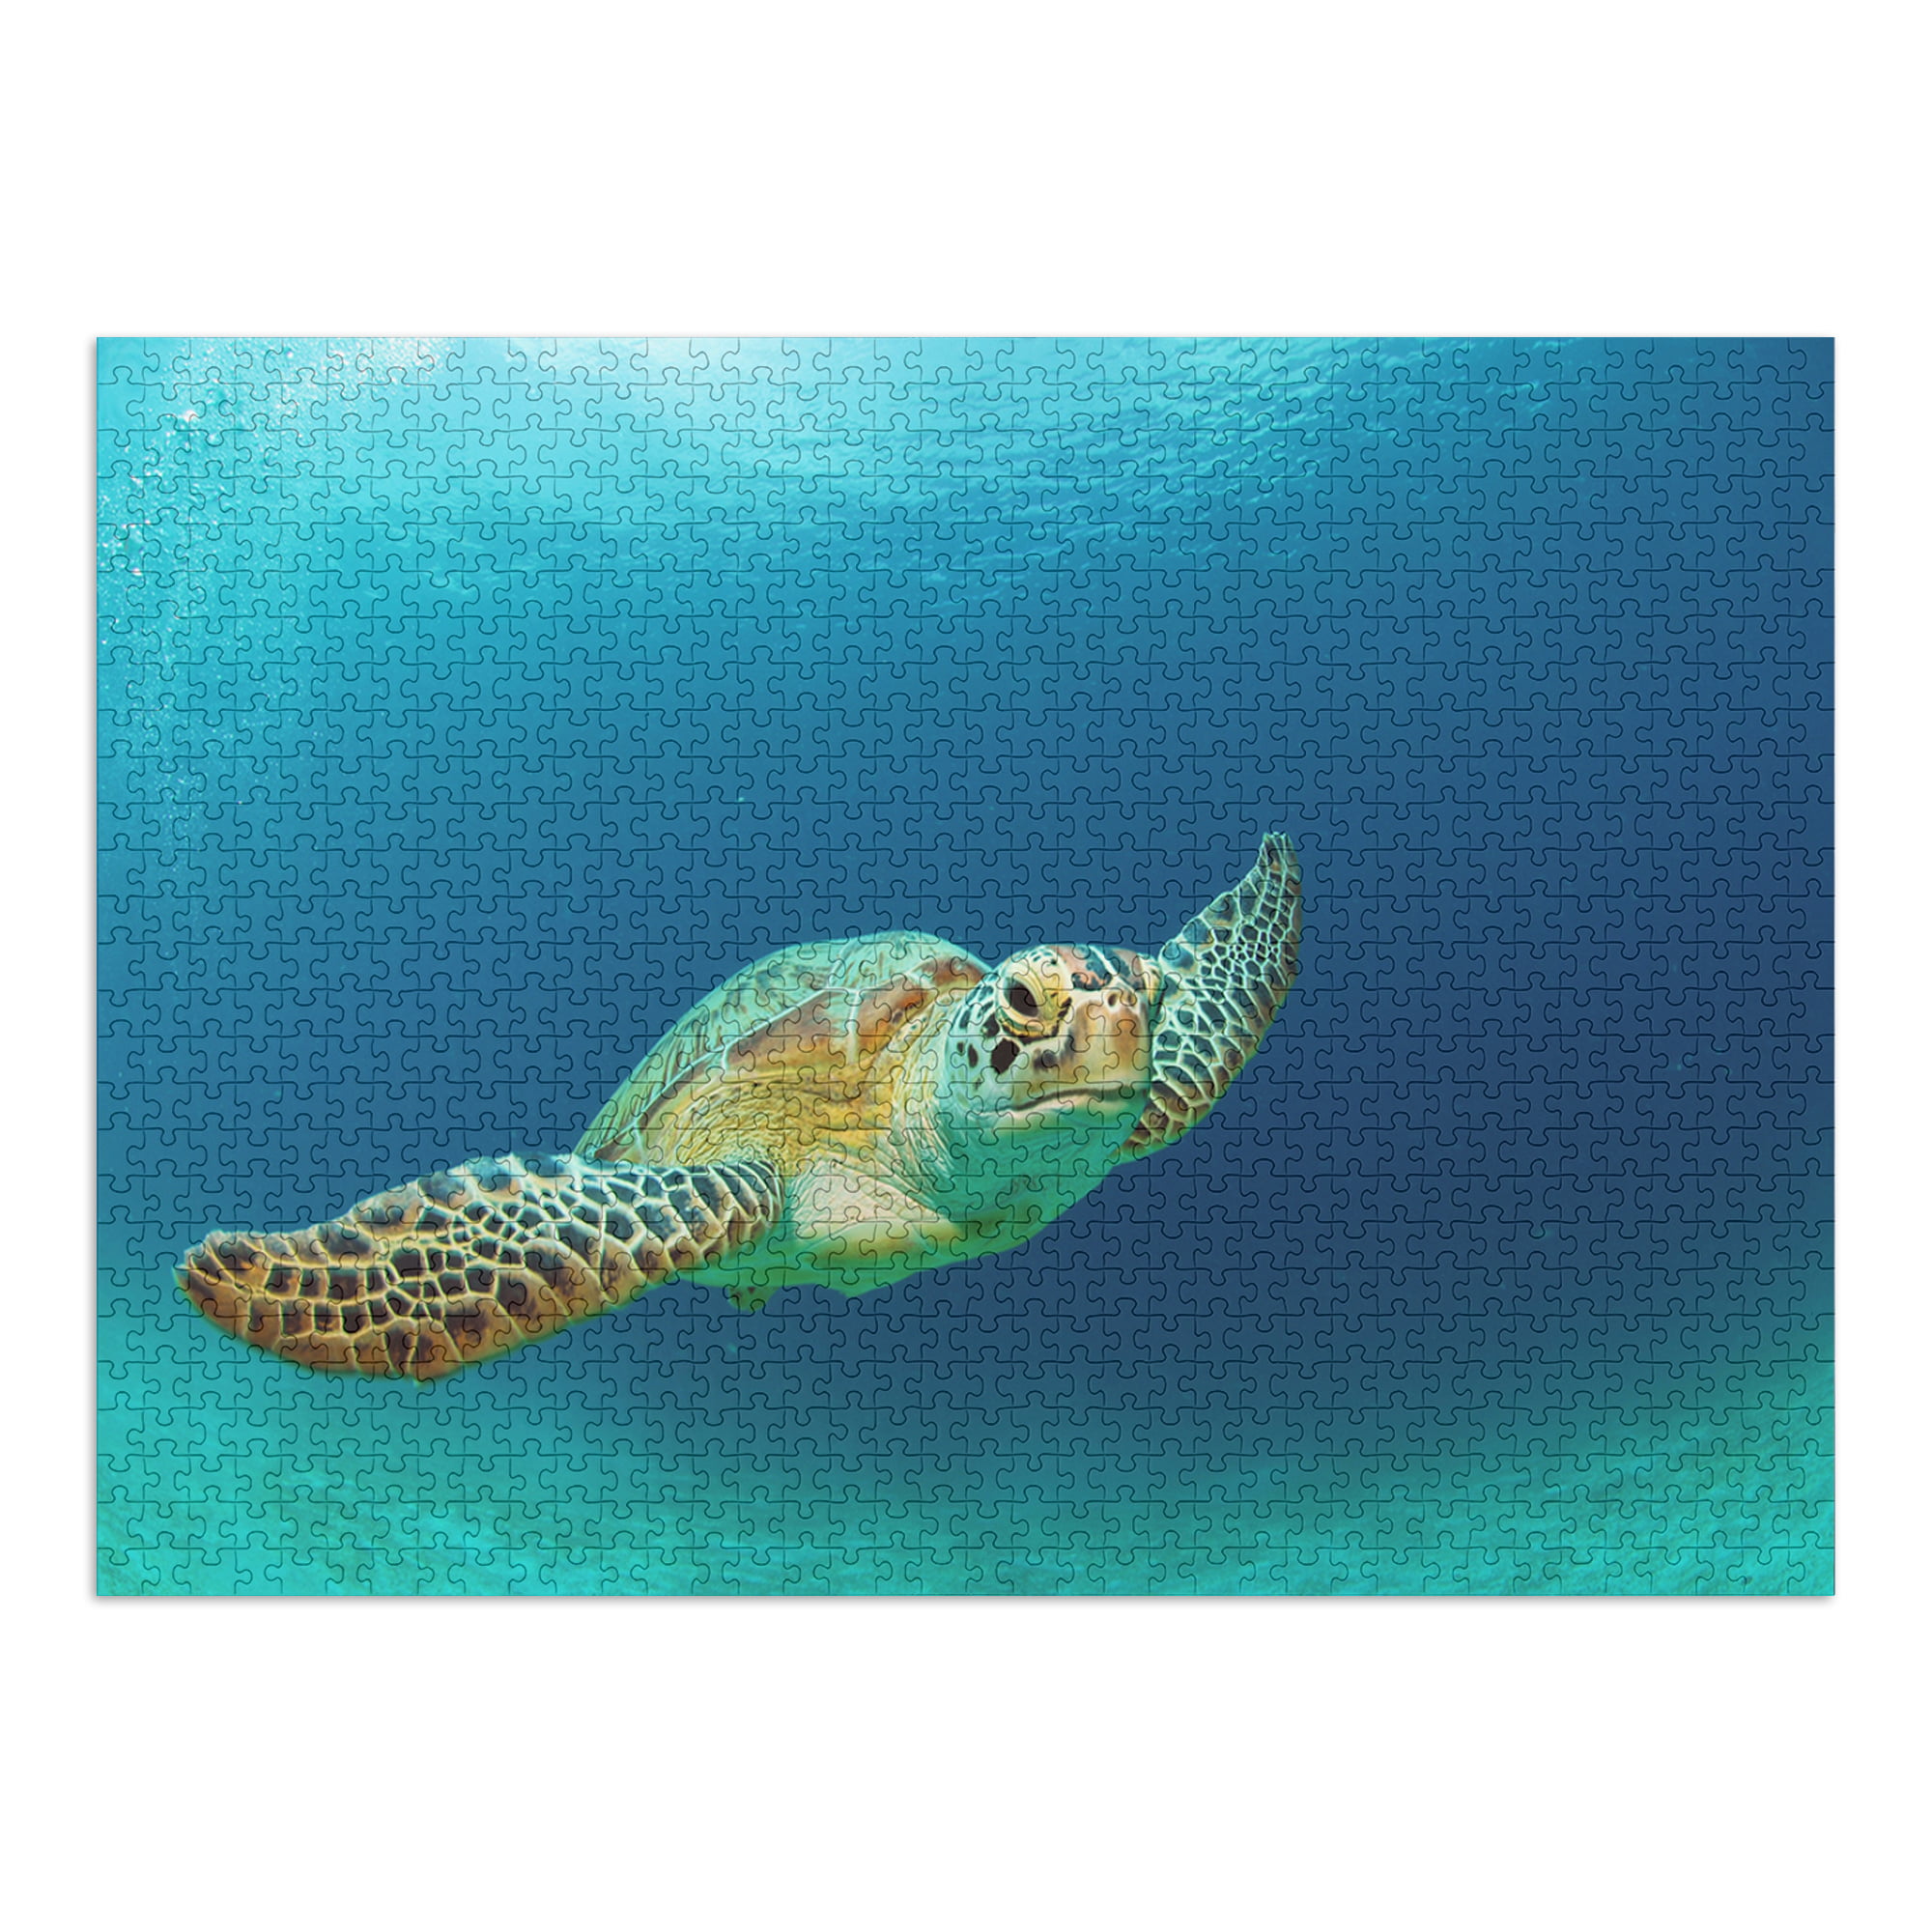 500 300 Pcs Sea Turtle Animals Jigsaw Puzzles Adults Kids Toys Gifts 1000 